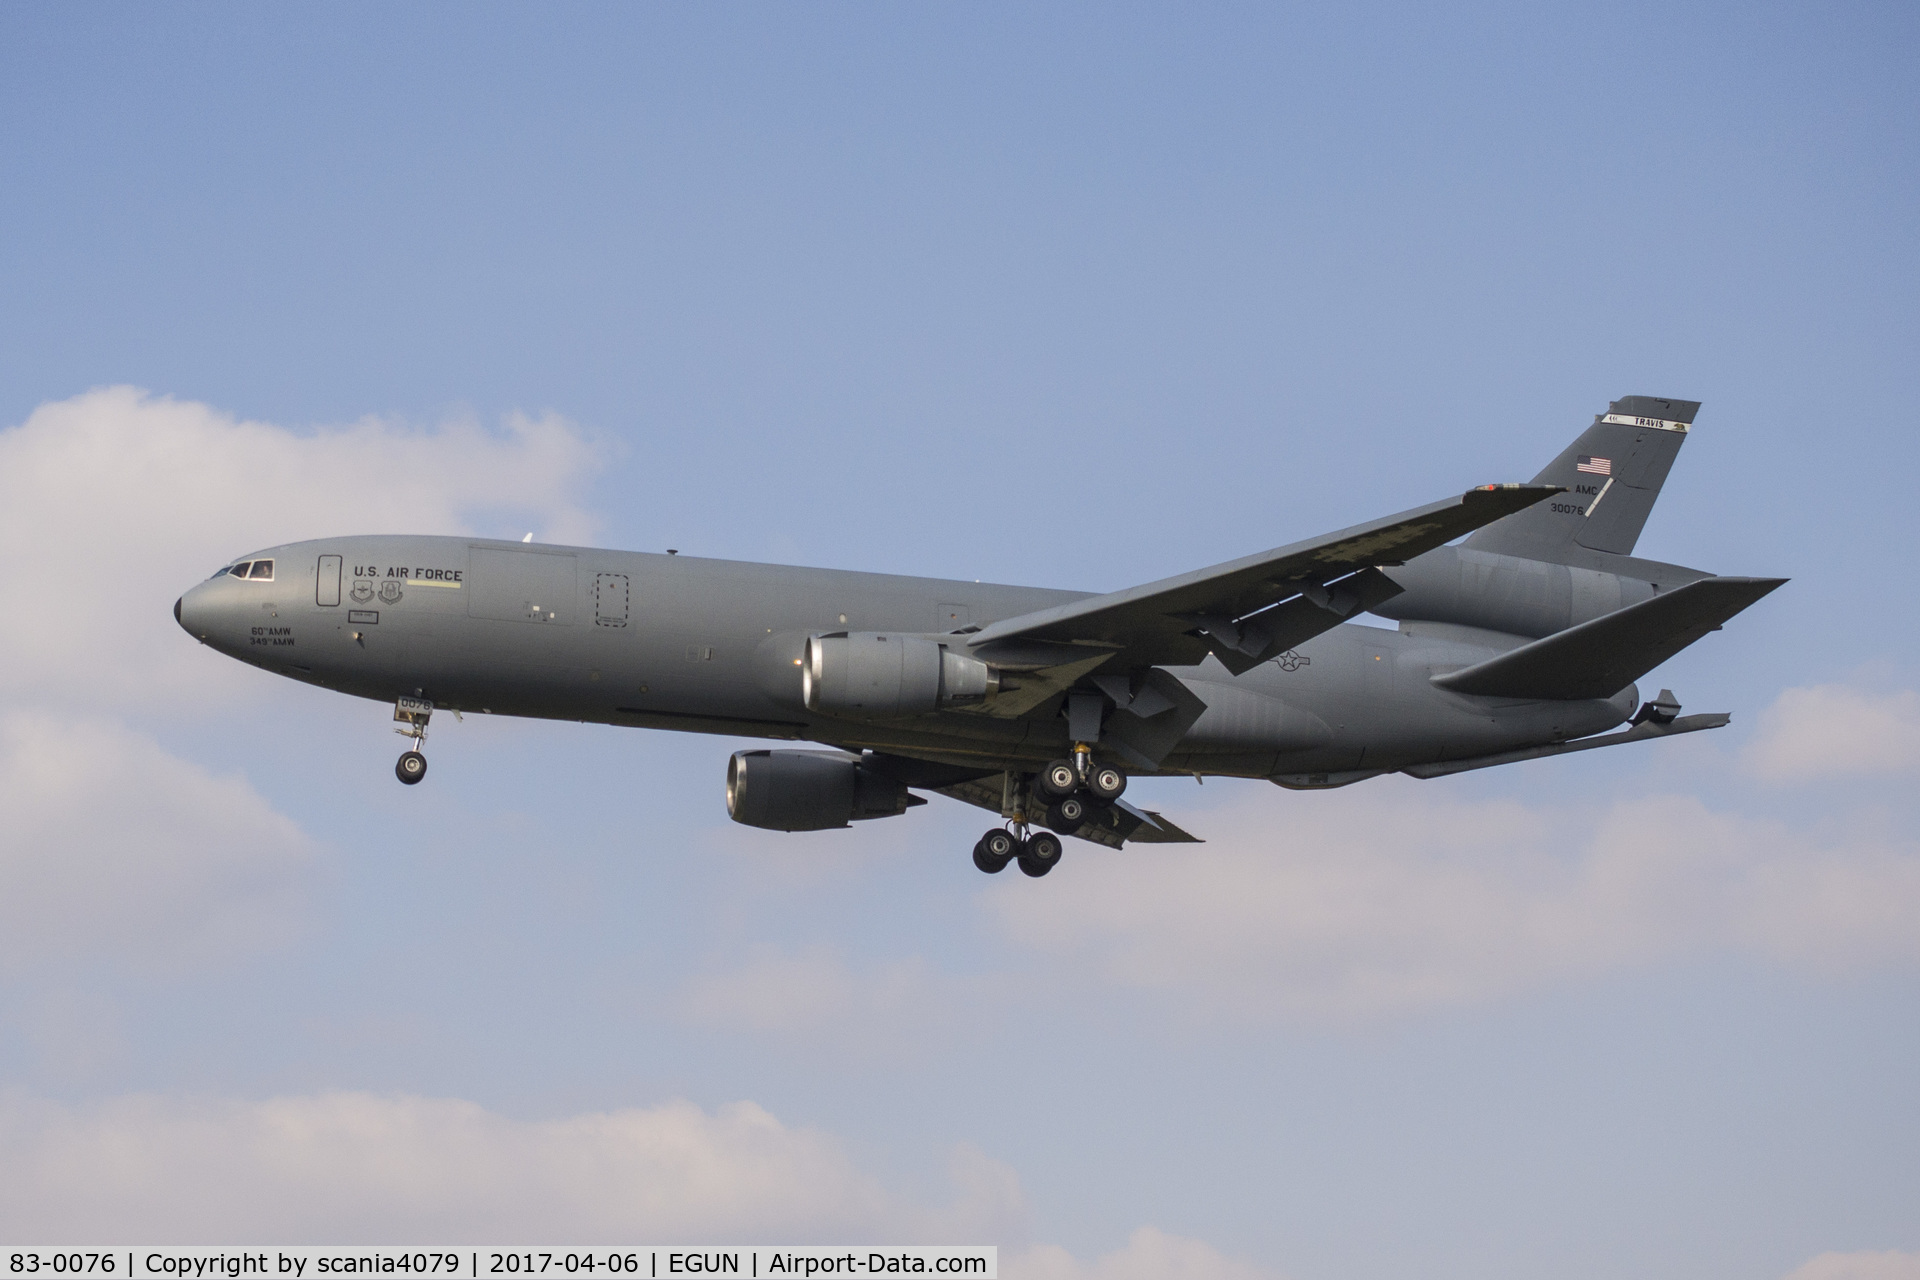 83-0076, 1983 McDonnell Douglas KC-10A Extender C/N 48217, KC-10A arriving at Mildenhall with GOLD04